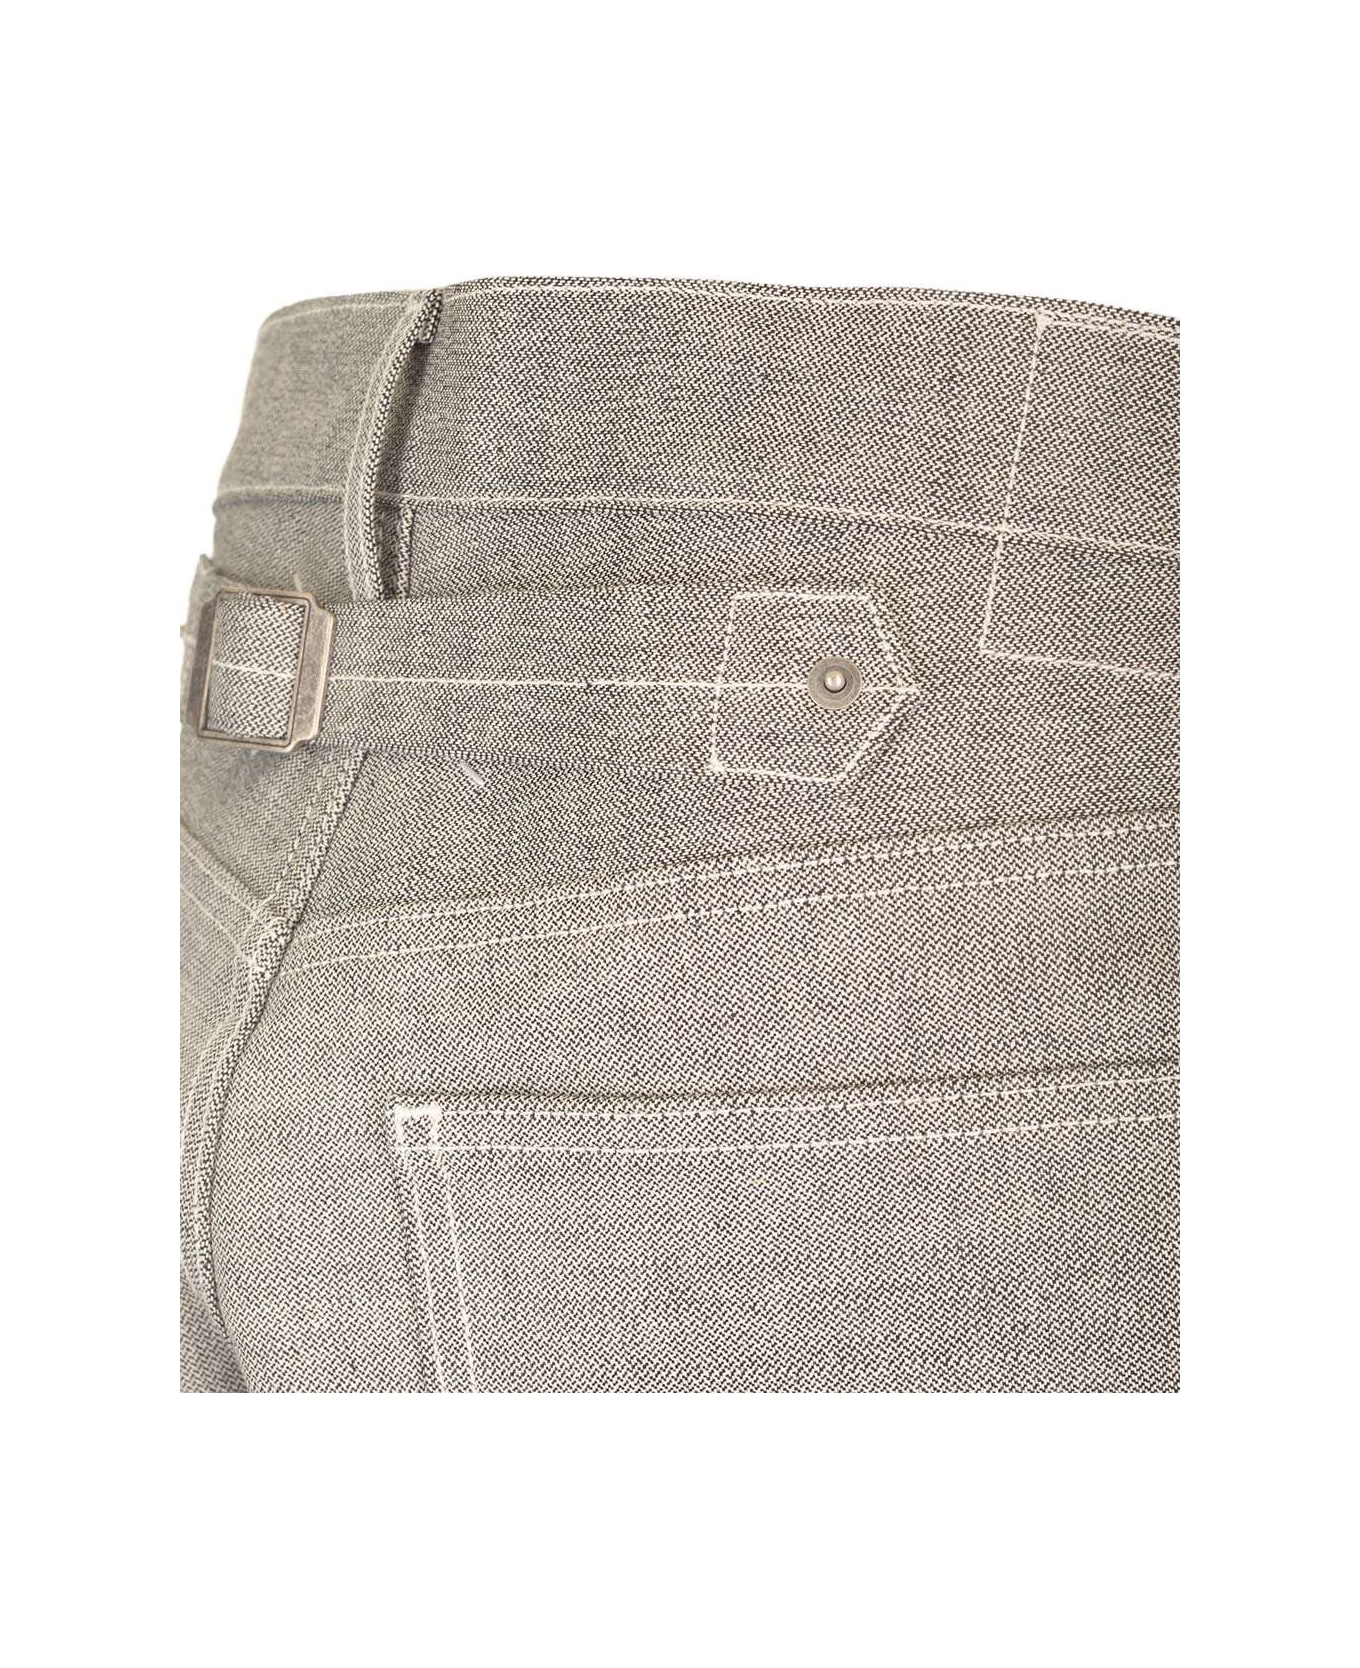 Maison Margiela Straight Buttoned Jeans - Grey ボトムス